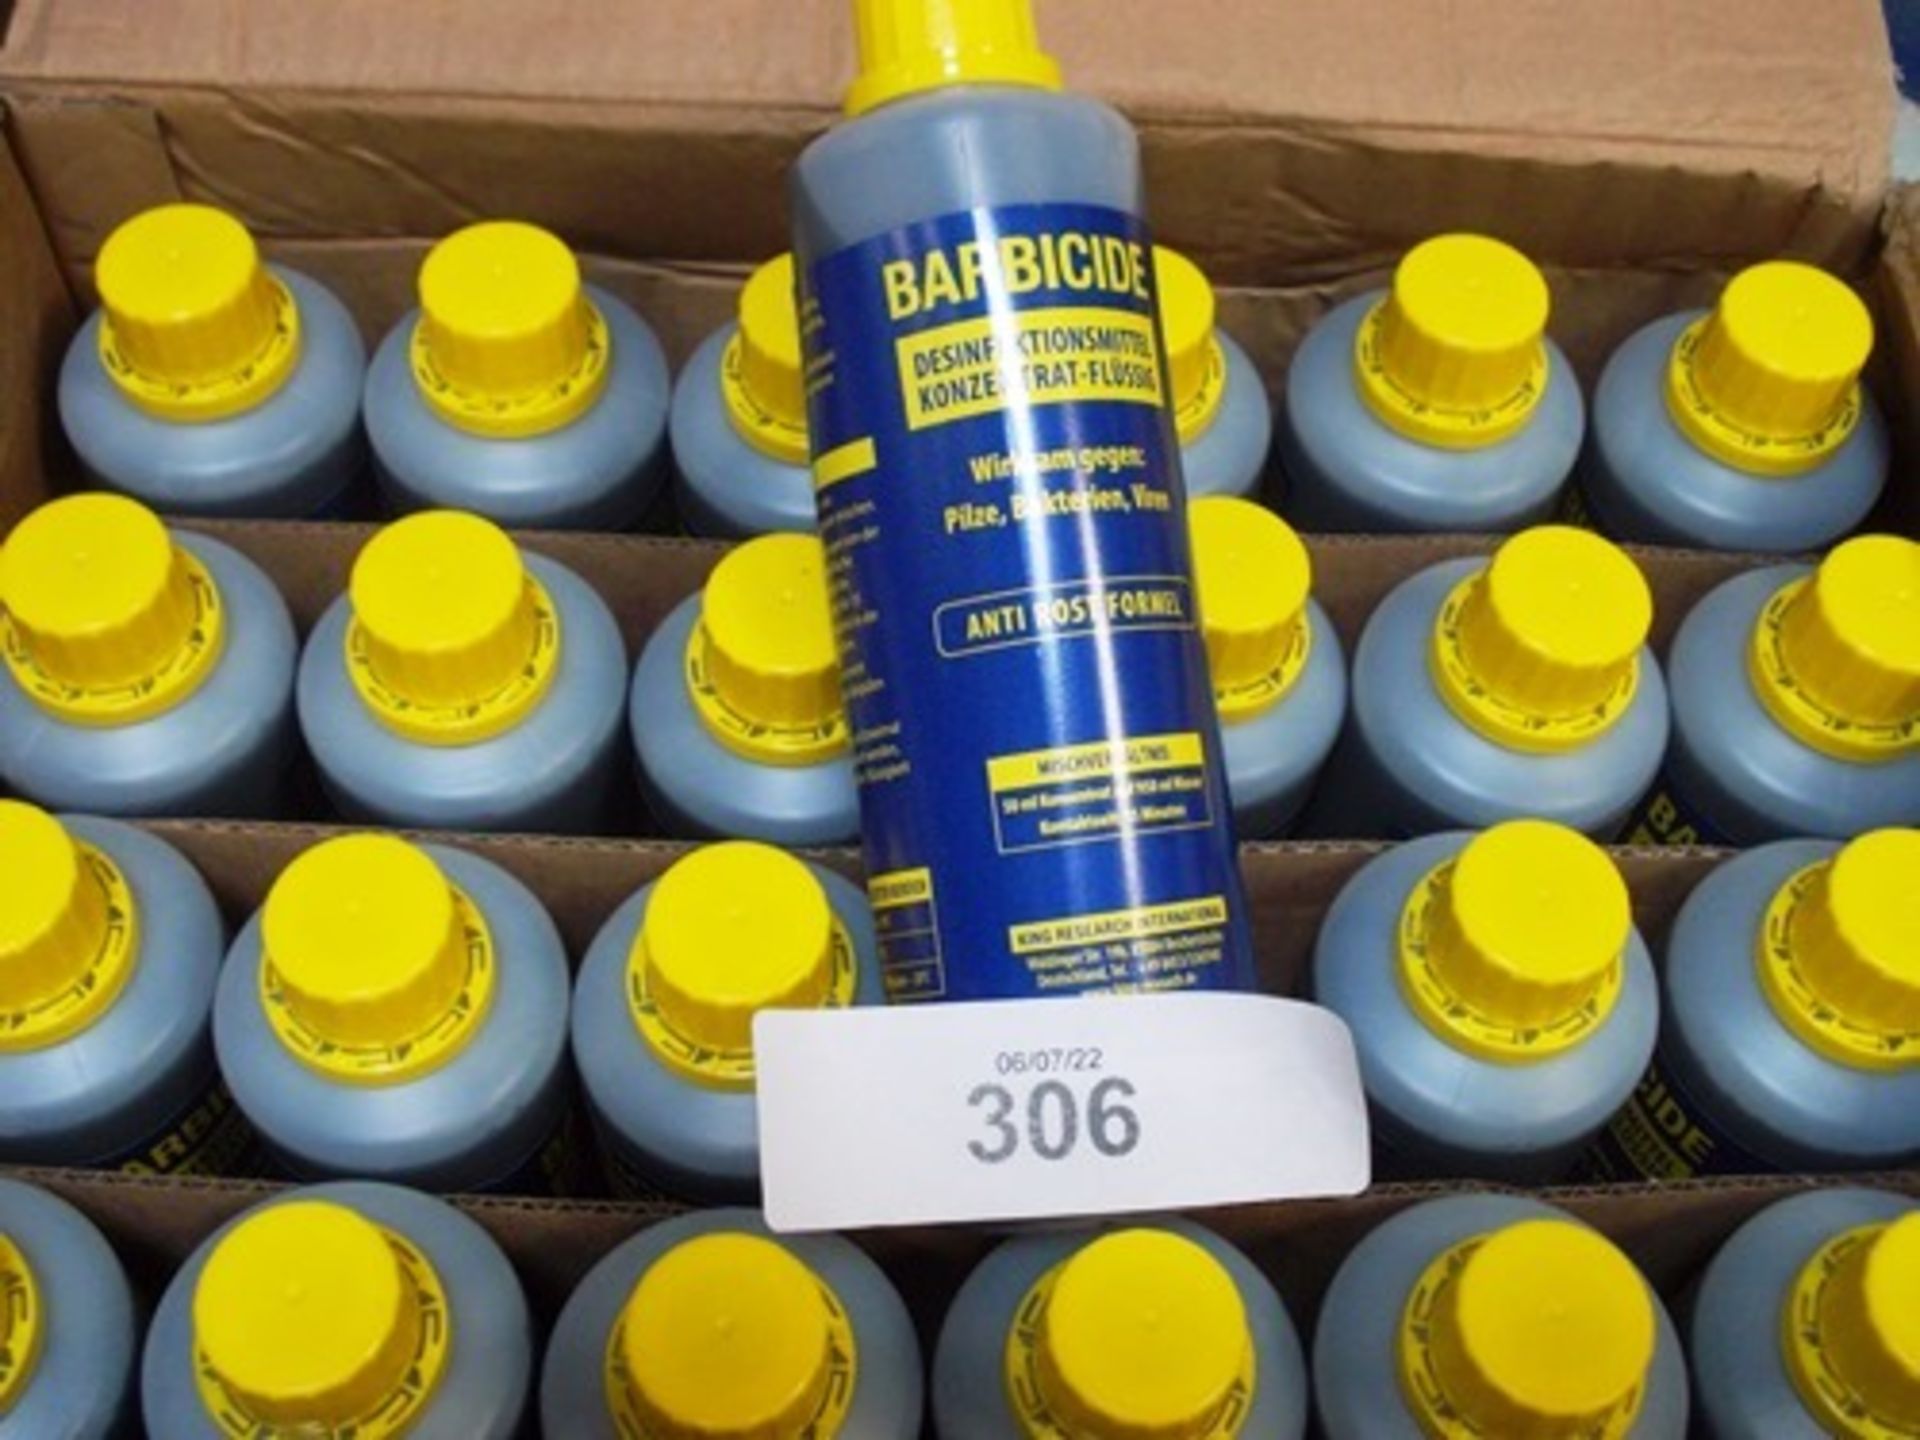 1 x box containing 24 x 500ml bottles of Barbicide disinfectant solution, code 4260638460058 -